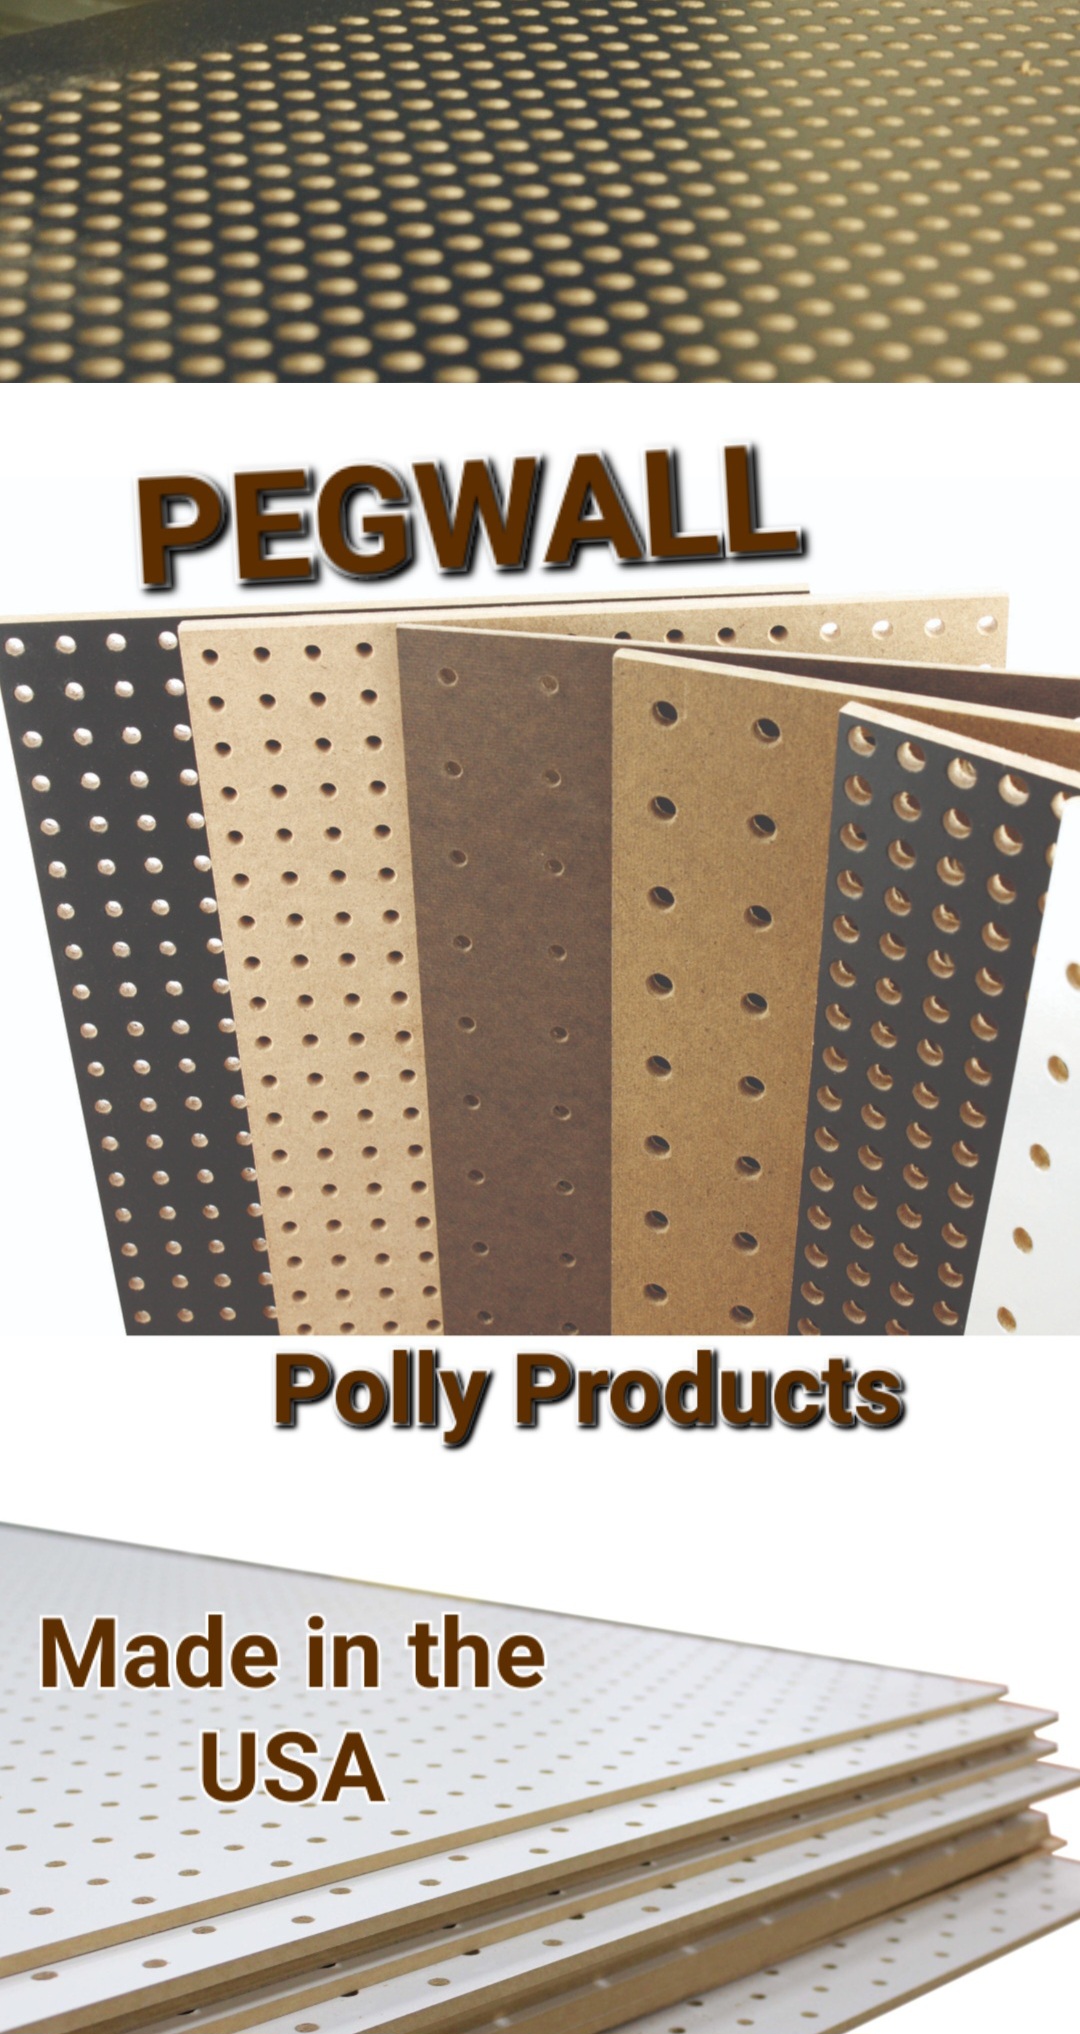 PEGWALL PANELS FROM PPC MADE IN THE USA. MULTIPLE COLOR OPTIONS!